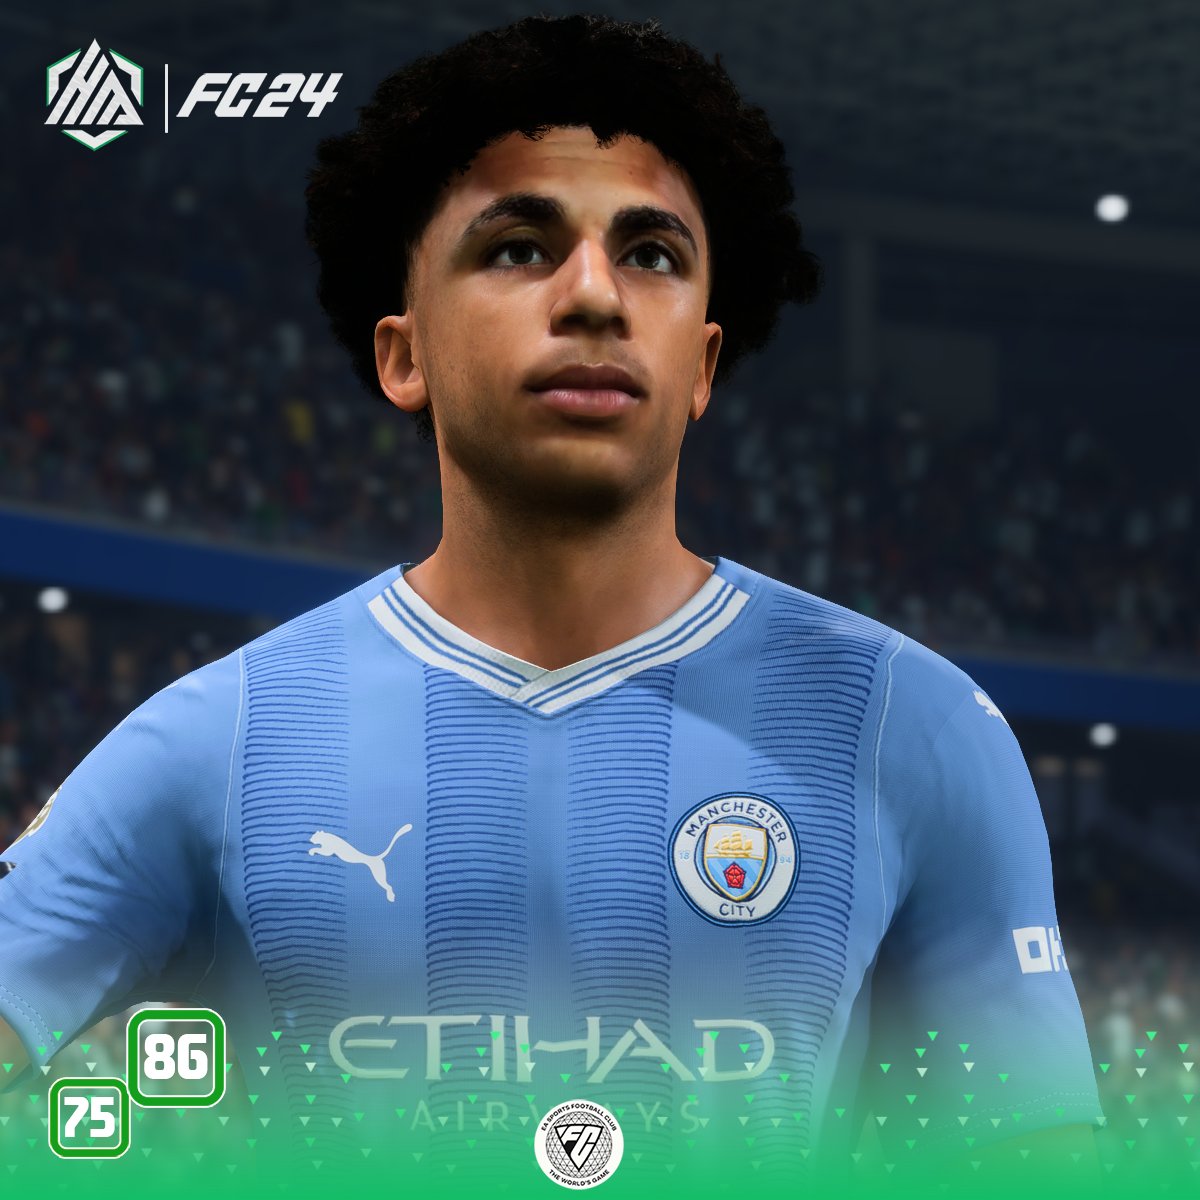 🌟Guardiola praised his pure talent  !! 18 years with High Potential in #FC24 🤩

Rico Lewis #ManchesterCity 's Gem 💎 

Release : Today ✅🤙 

#EAFC24 #PremierLeague #Citizens #ManchesterDerbyWeek #ManchesterisBlue